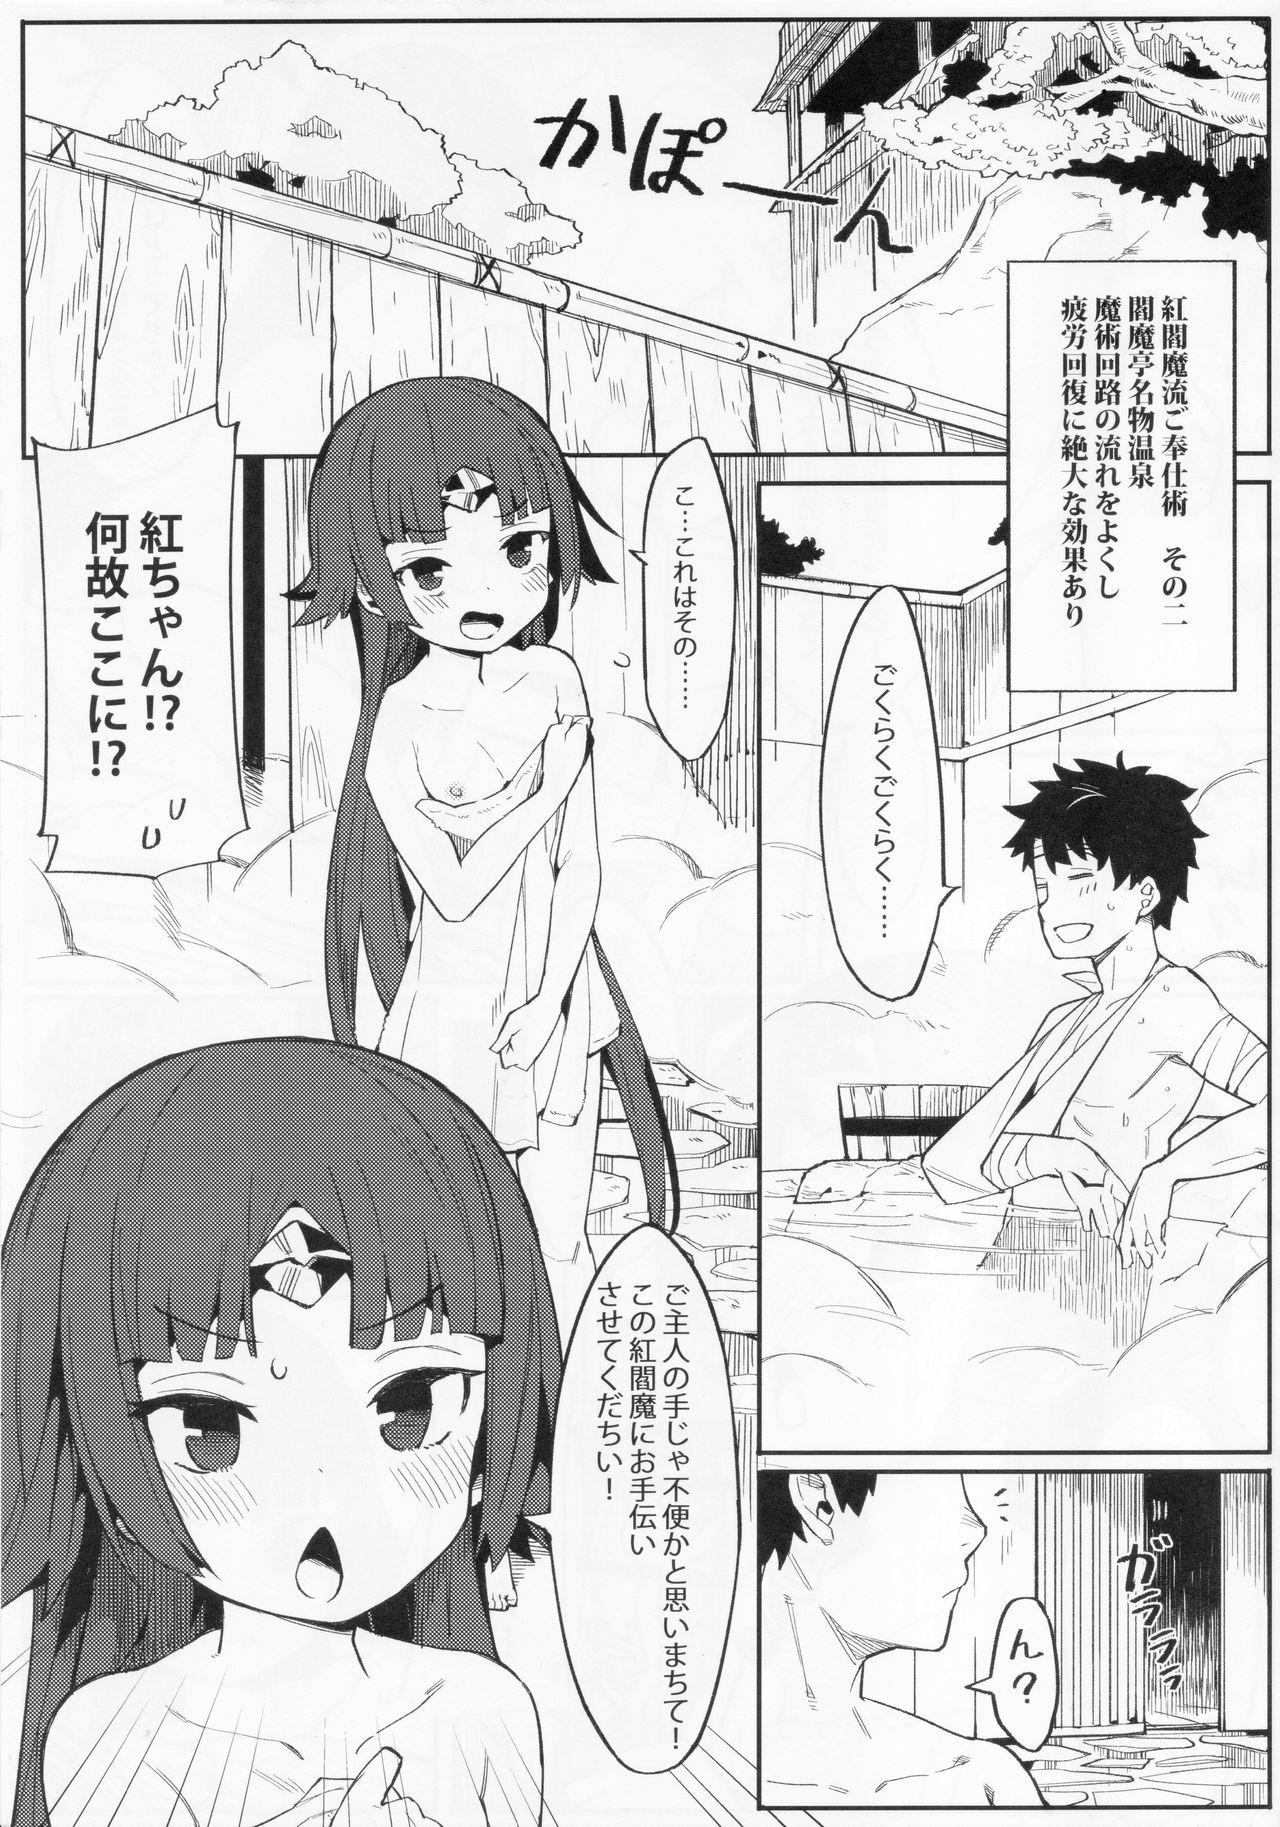 Young Old Enmatei Ryouyou-ki - Fate grand order Student - Page 6